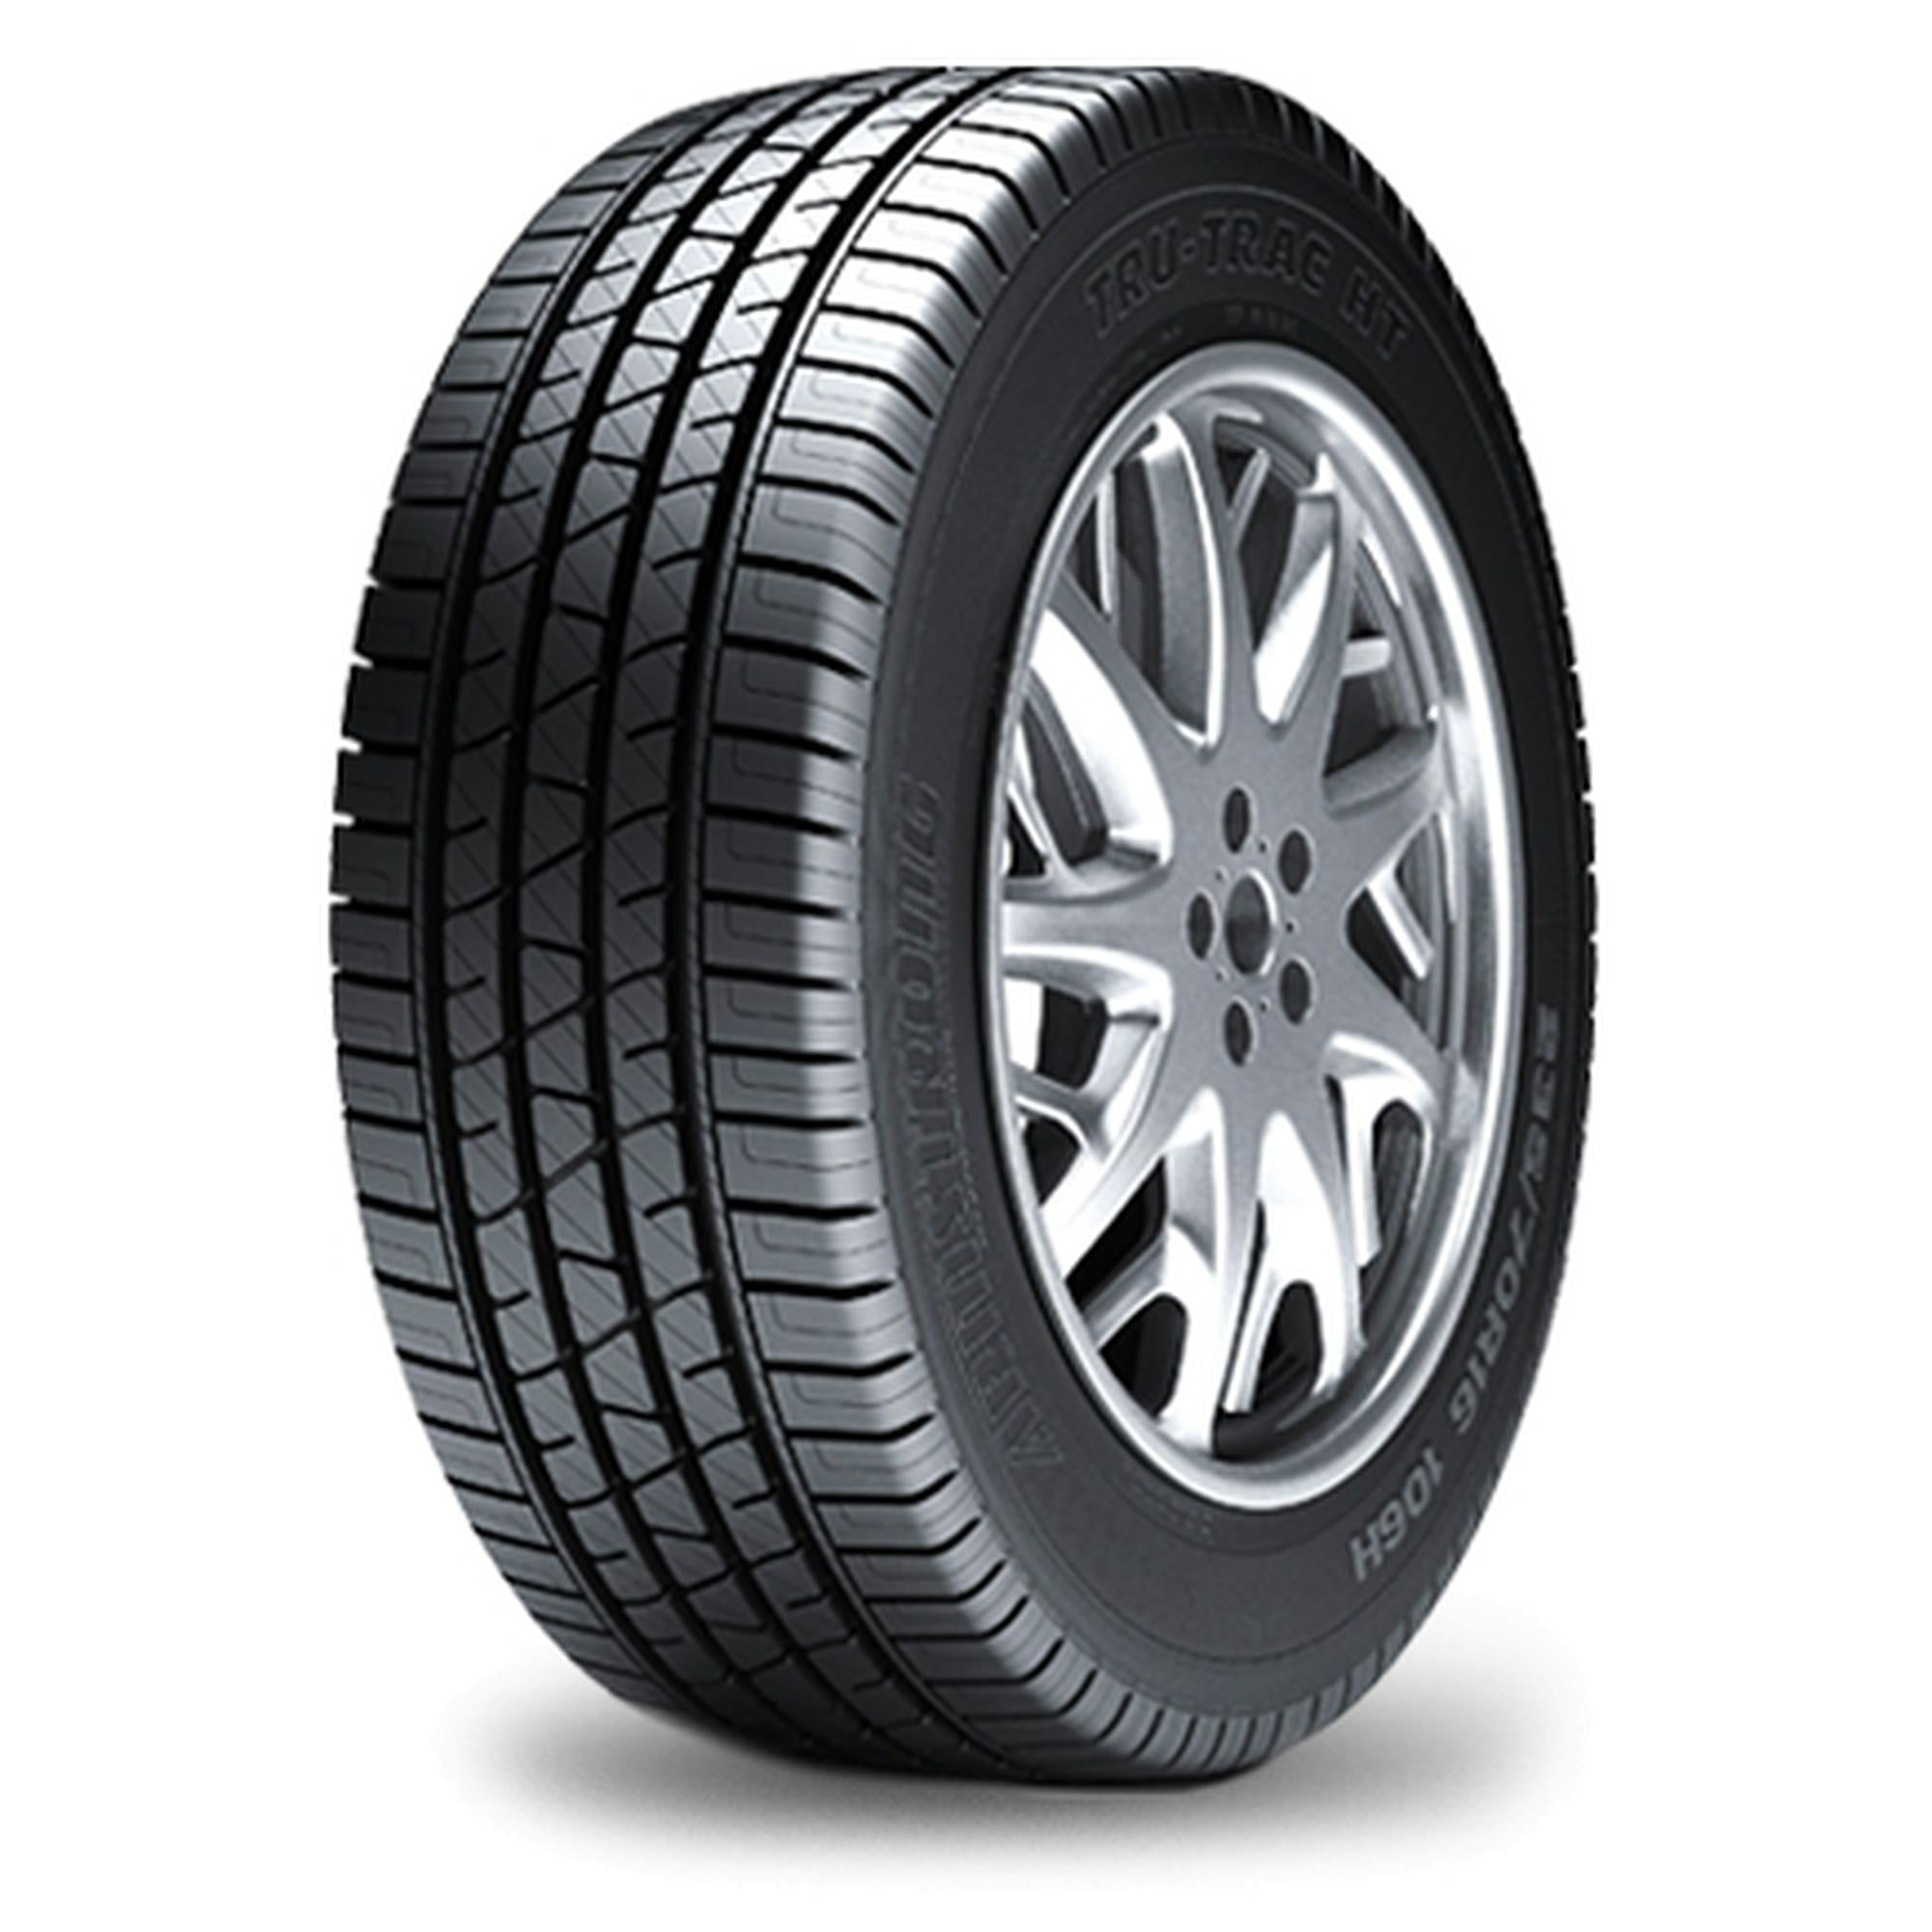 MAXXIS BRAVO SERIES AT-771 P275/60R20 115S BSW ALL SEASON TIRE